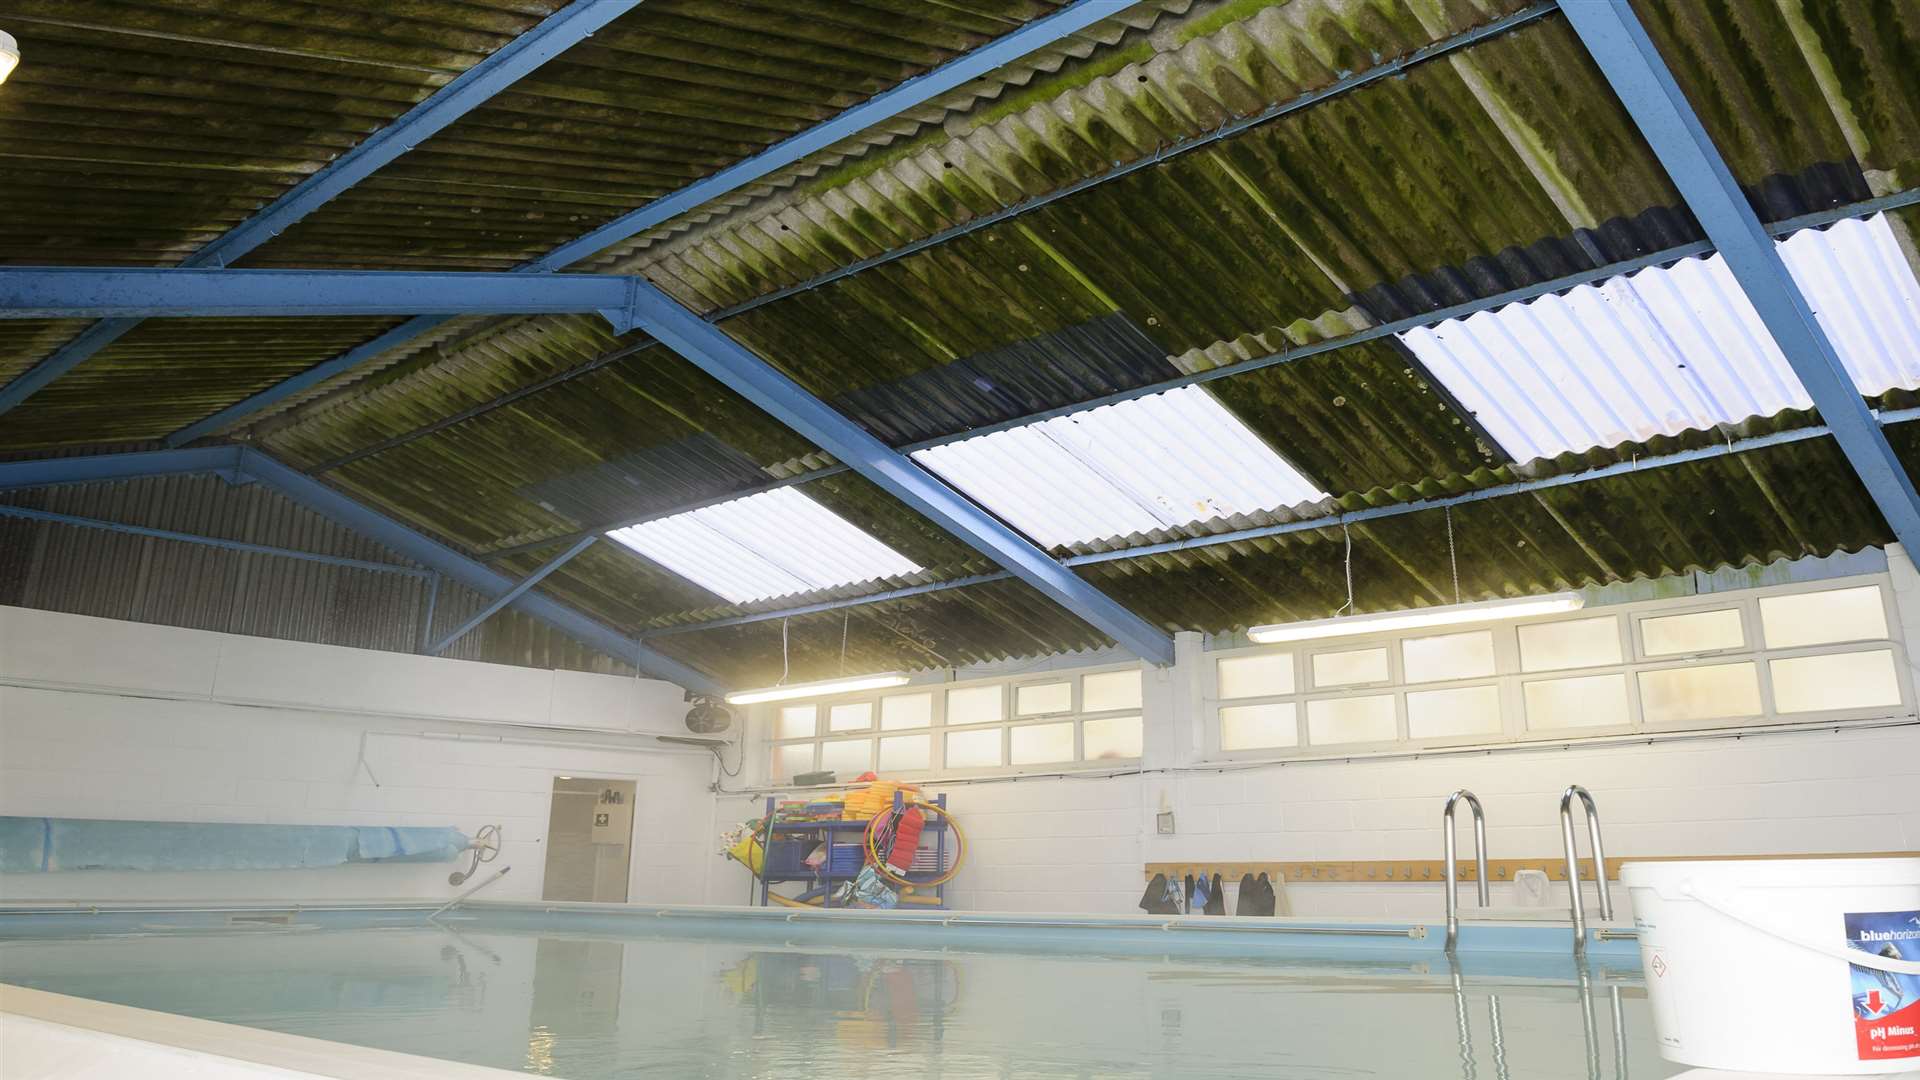 The view of the pool at Cecil Road Primary School, Gravesend.